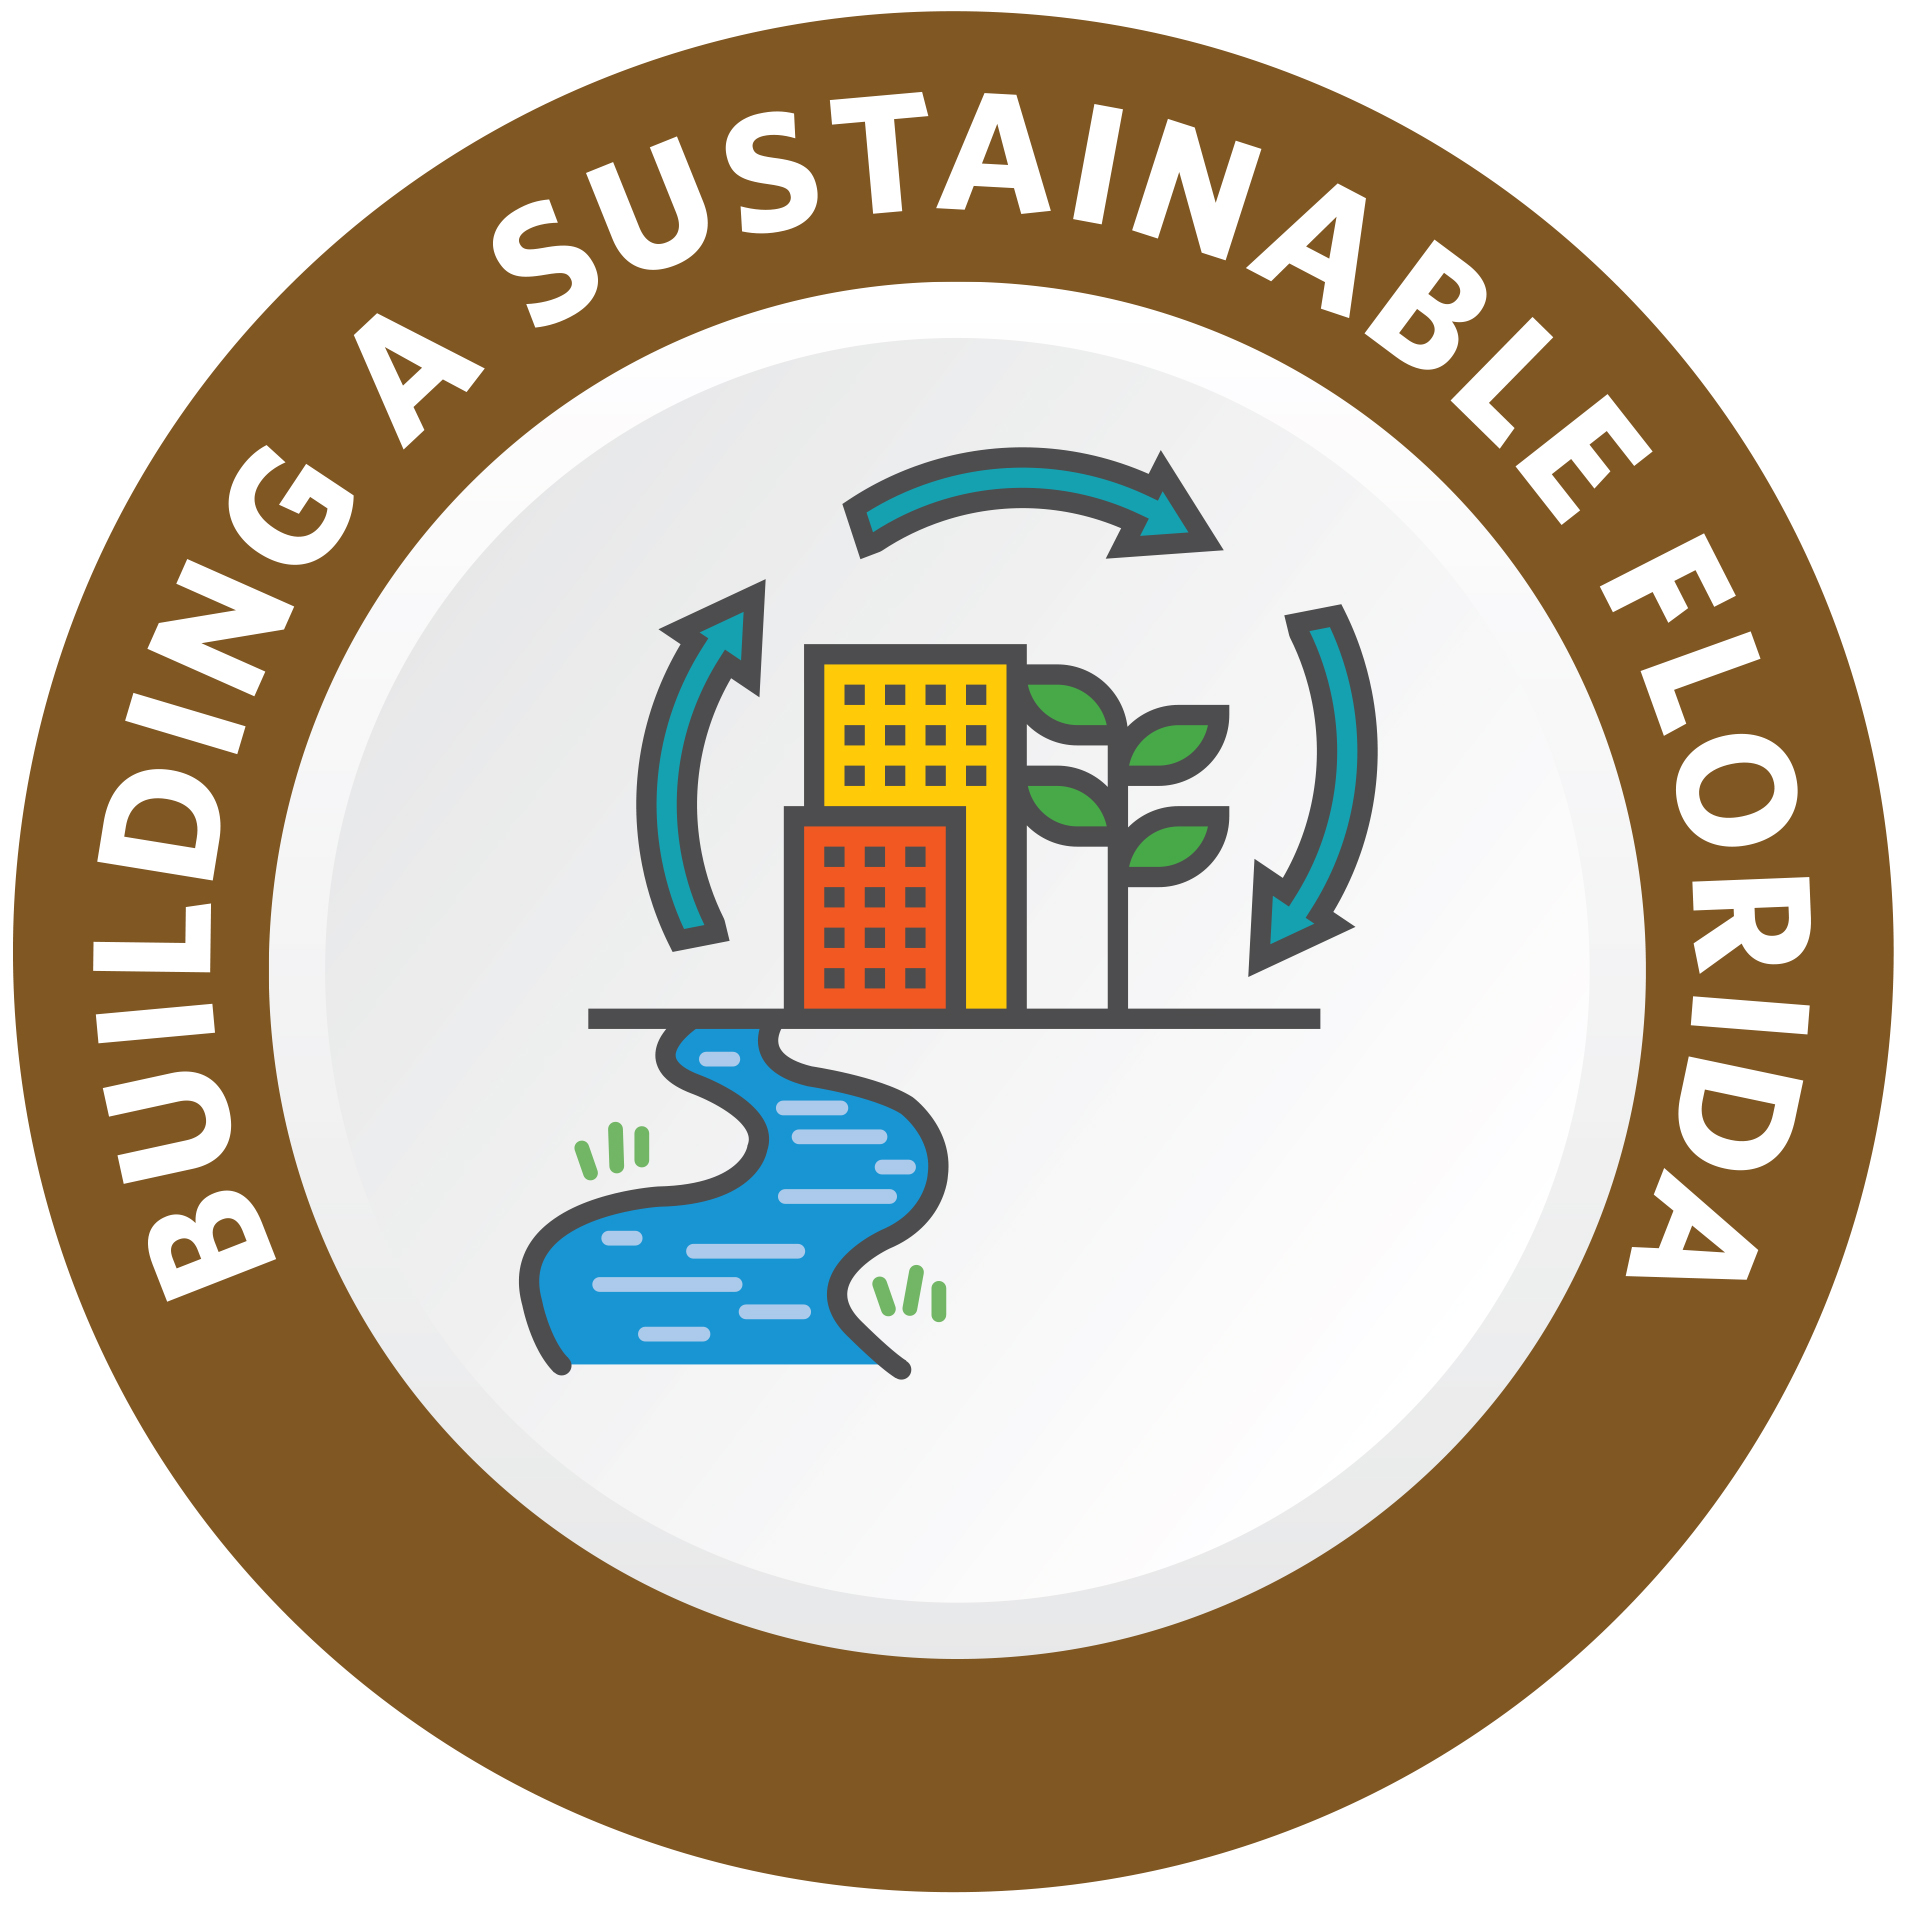 Building a sustainable Florida.